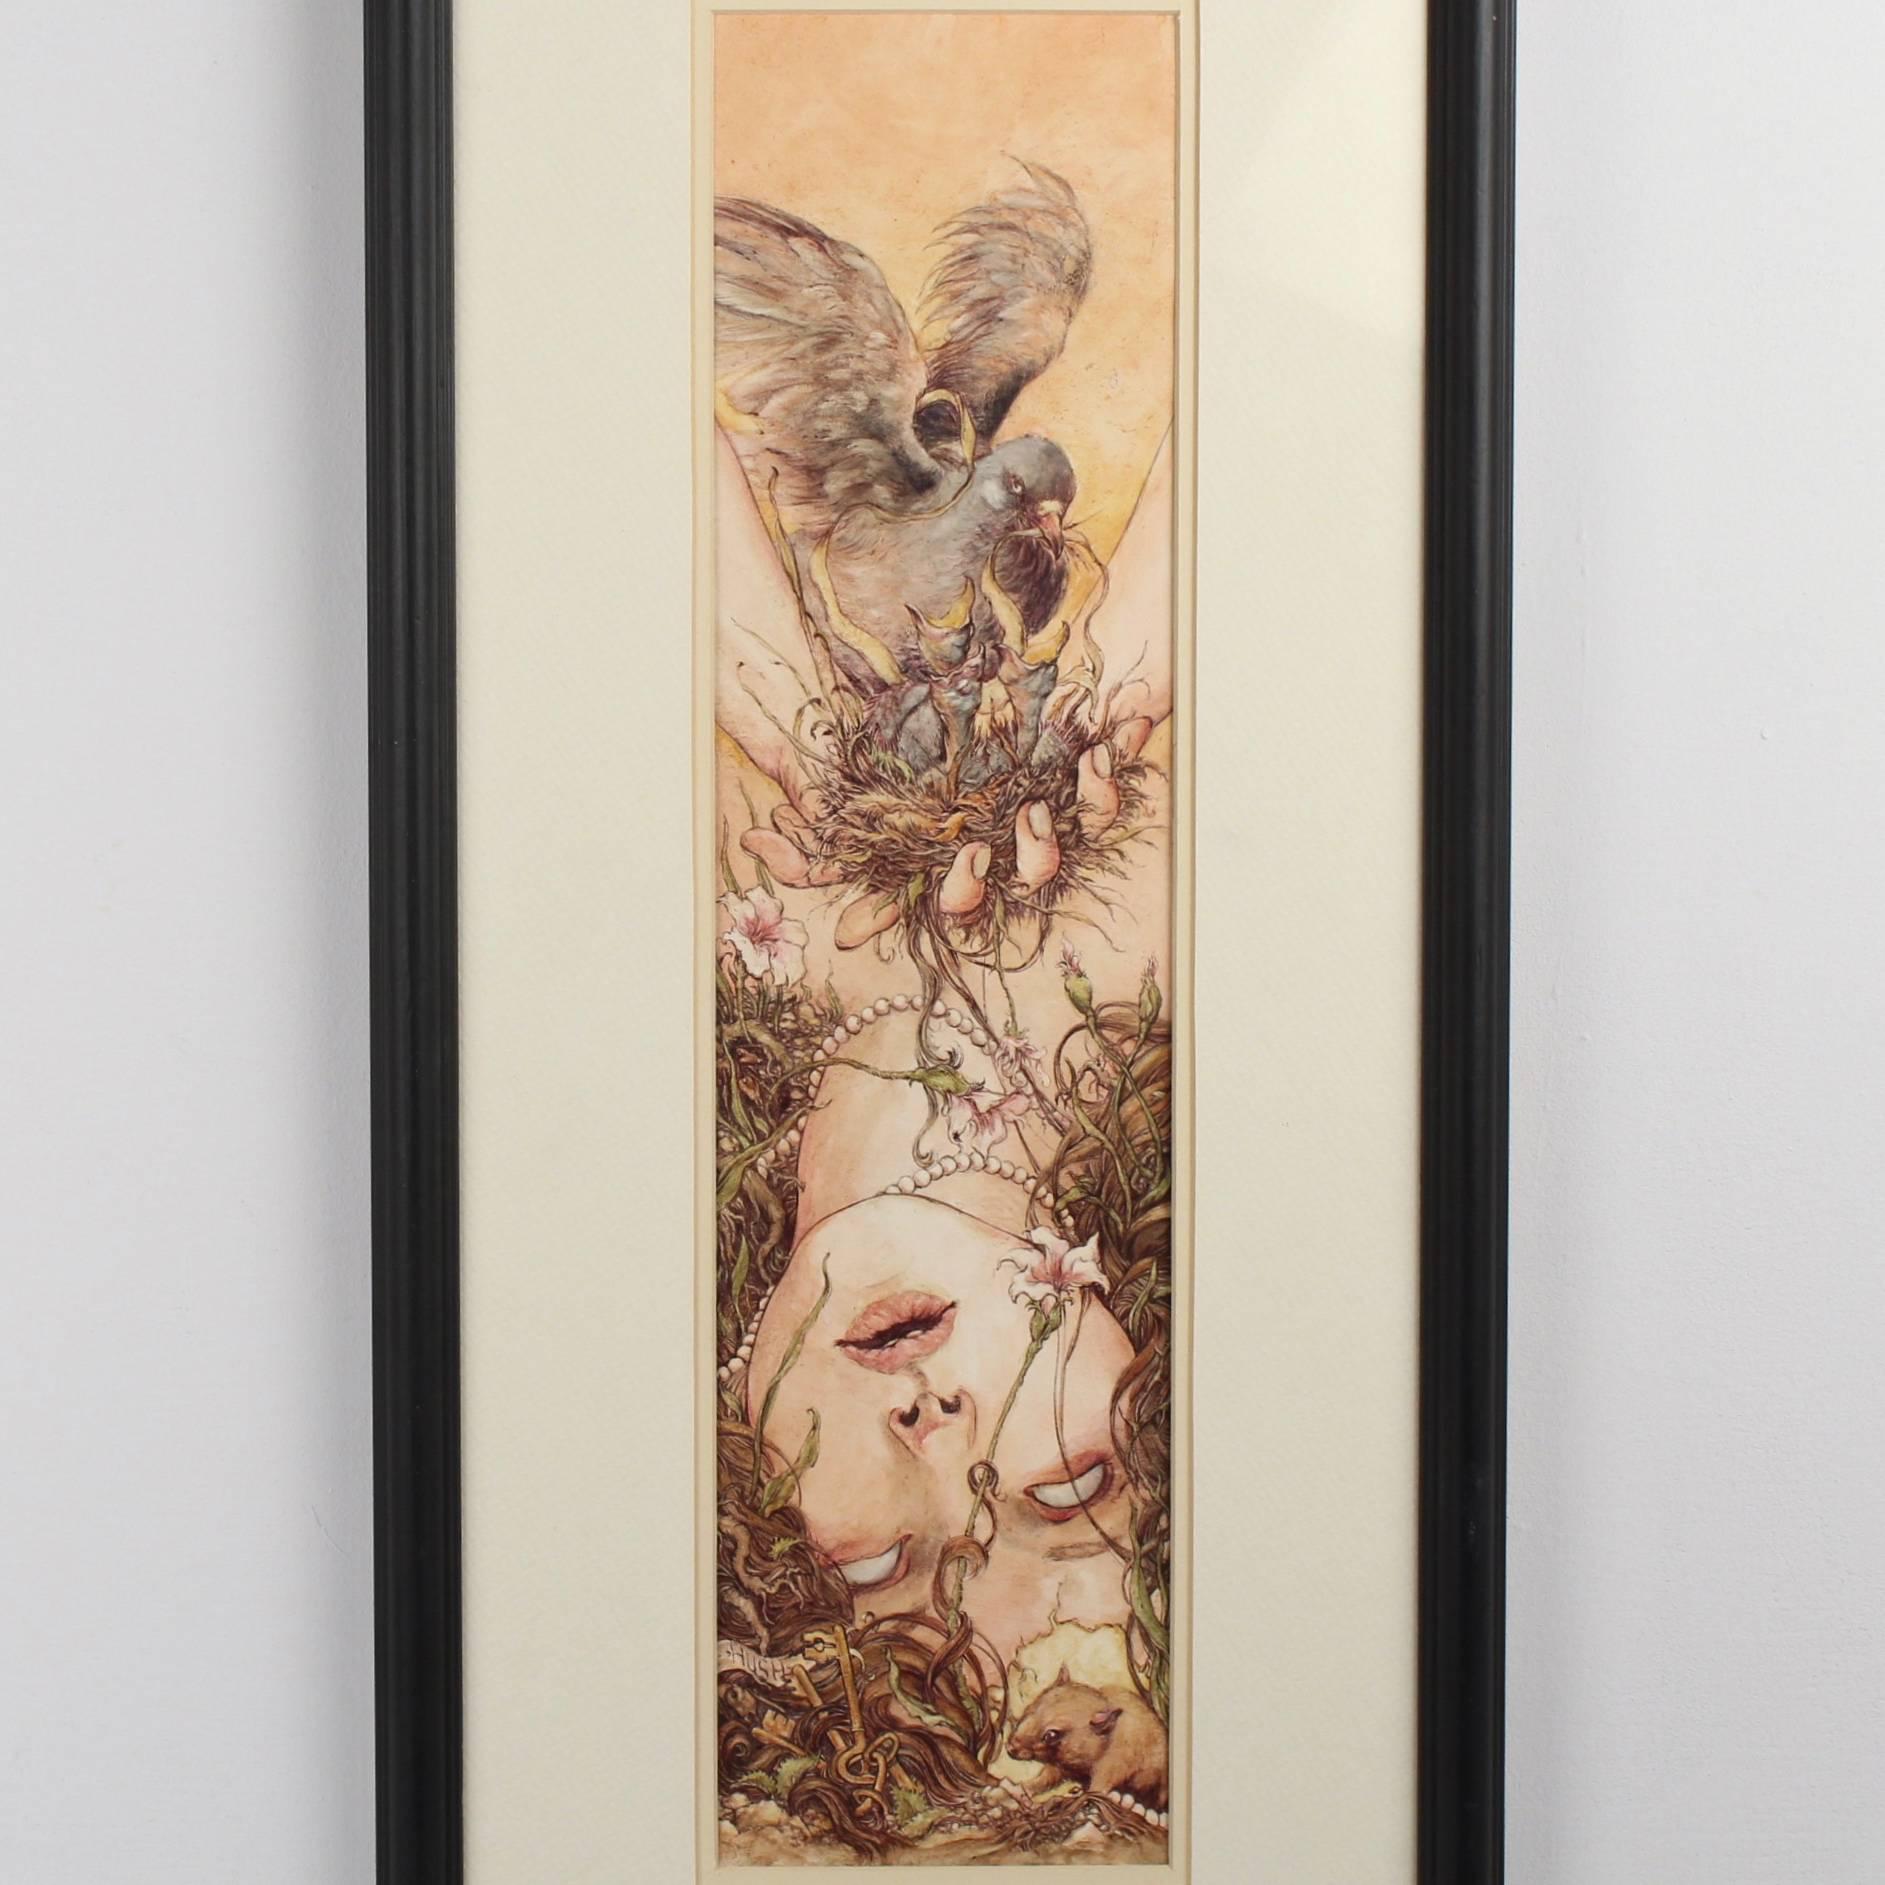 Husk.

A biro, watercolor, gouache painting. 

Sight size: cm 5 in. x 19 in.
Frame size: cm 11 in. x 25 in.

Jeremy Hush - a long time punk and heavy metal scene illustrator long ago moved beyond the confines of being a formative scene artist